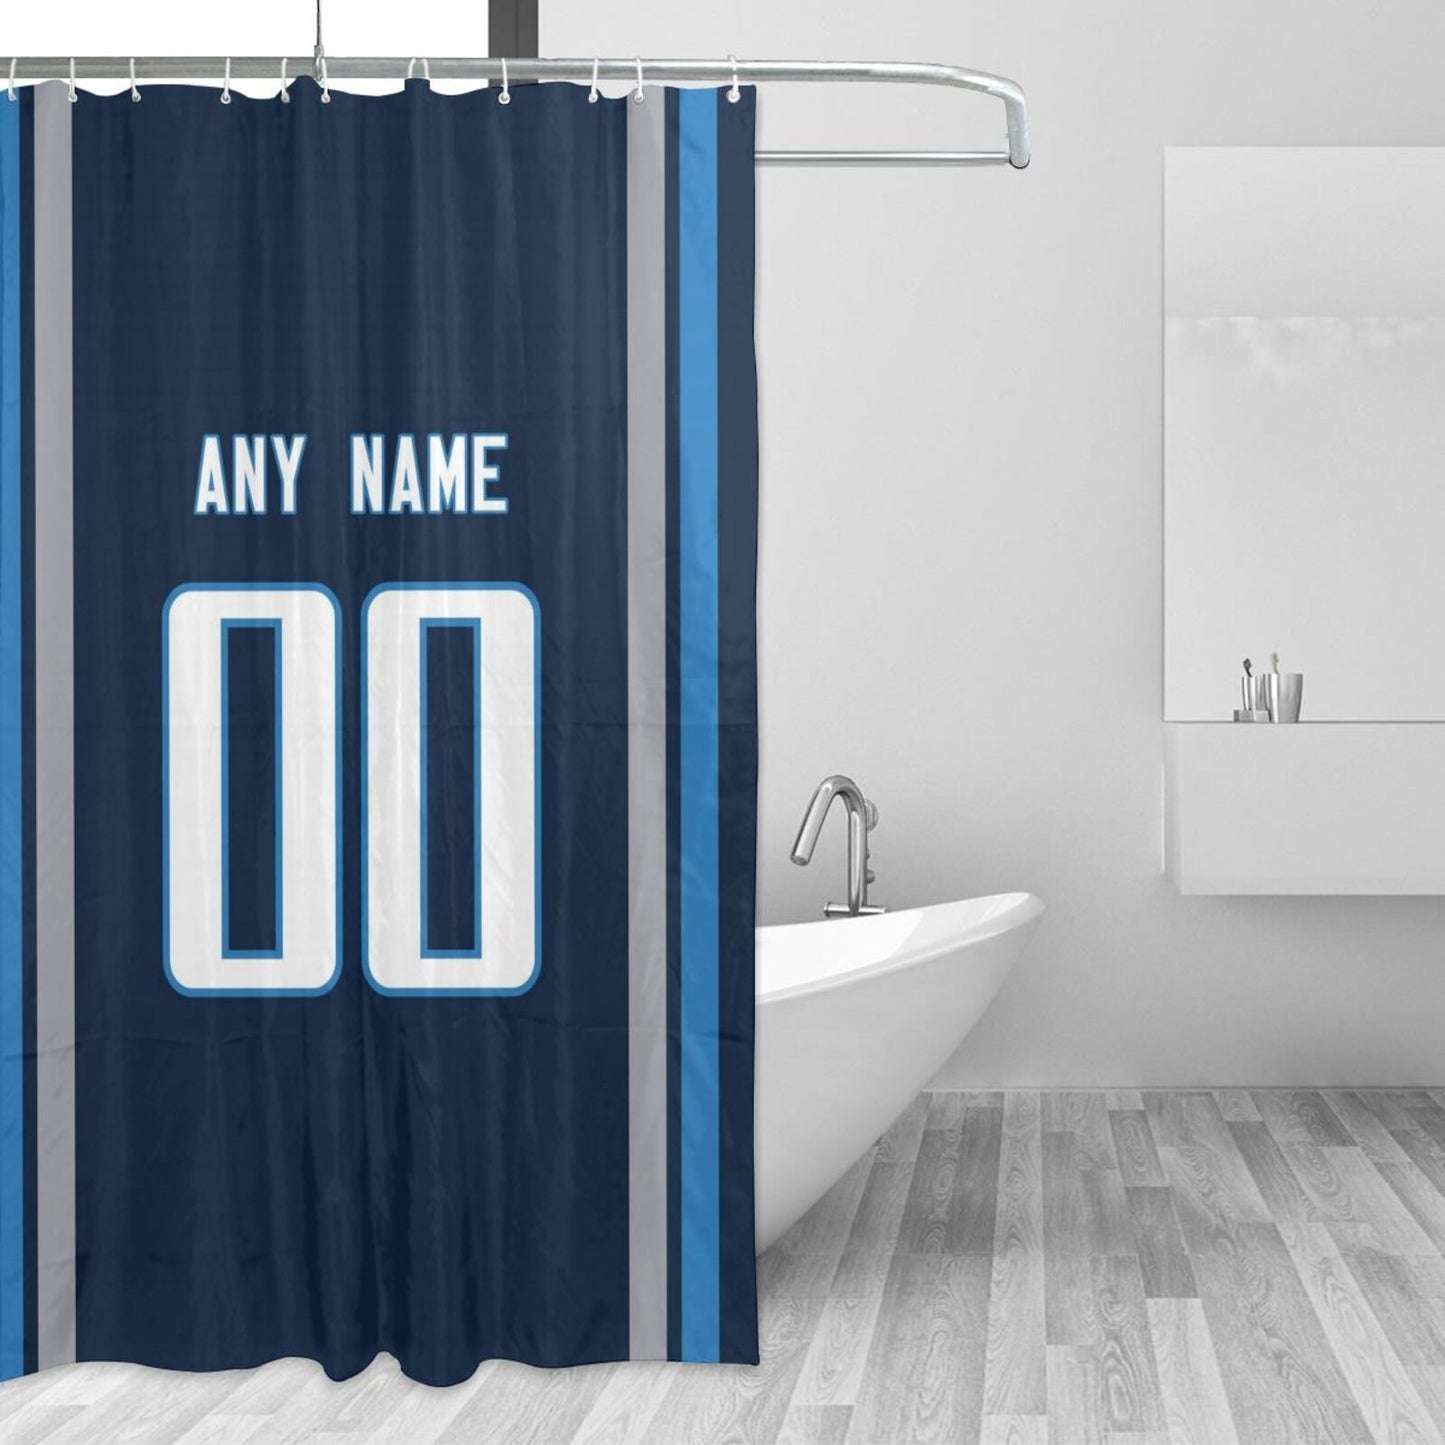 Custom Football Tennessee Titans style personalized shower curtain custom design name and number set of 12 shower curtain hooks Rings